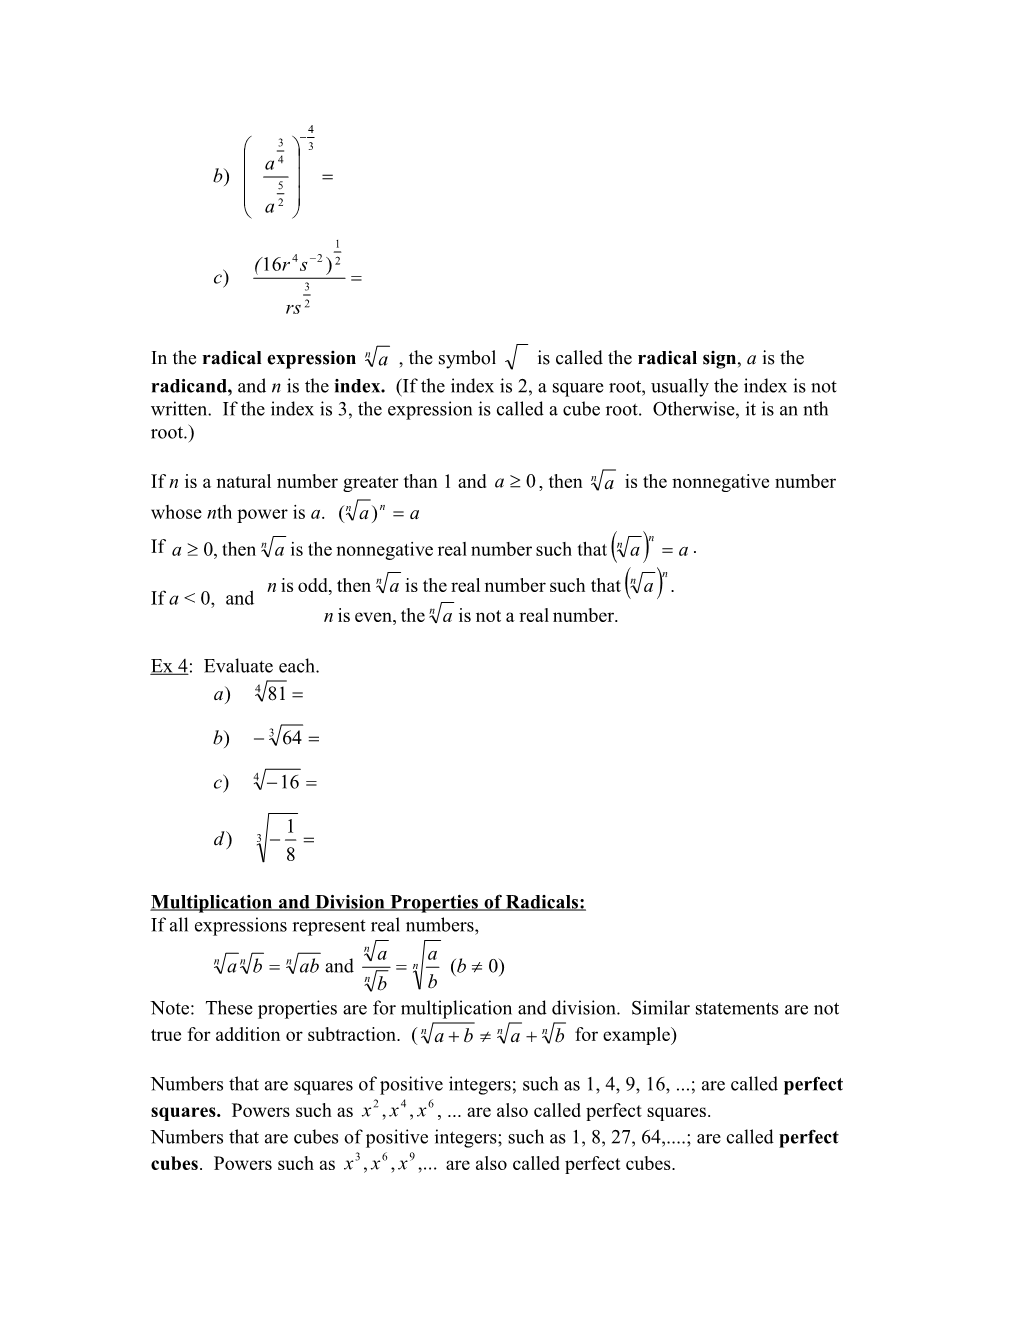 Definition of a Rational Exponent (1)